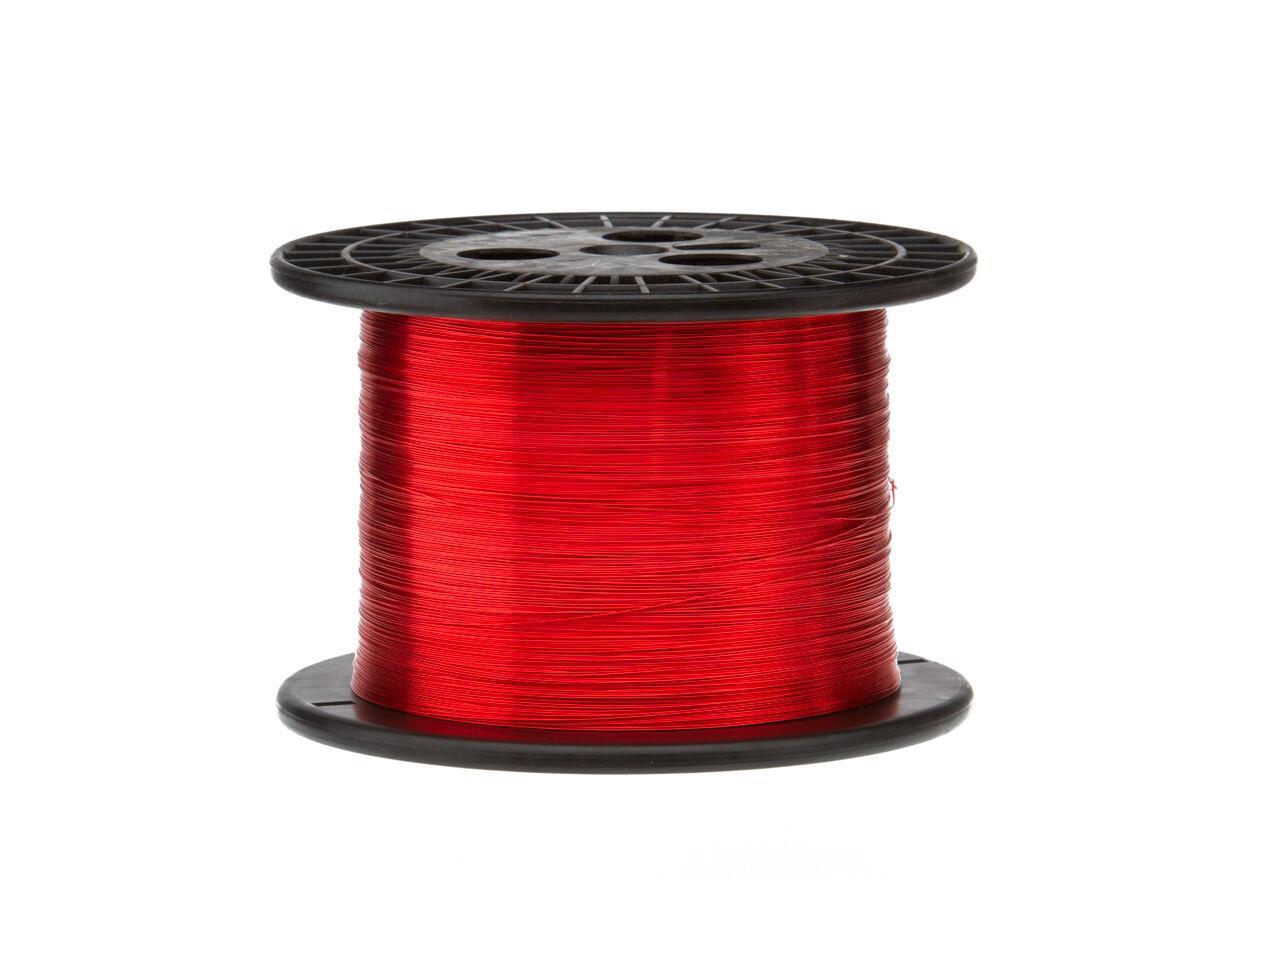 24 AWG Gauge Enameled Copper Magnet Wire 1.0 lbs 803' Length 0.0211" 155C Red 